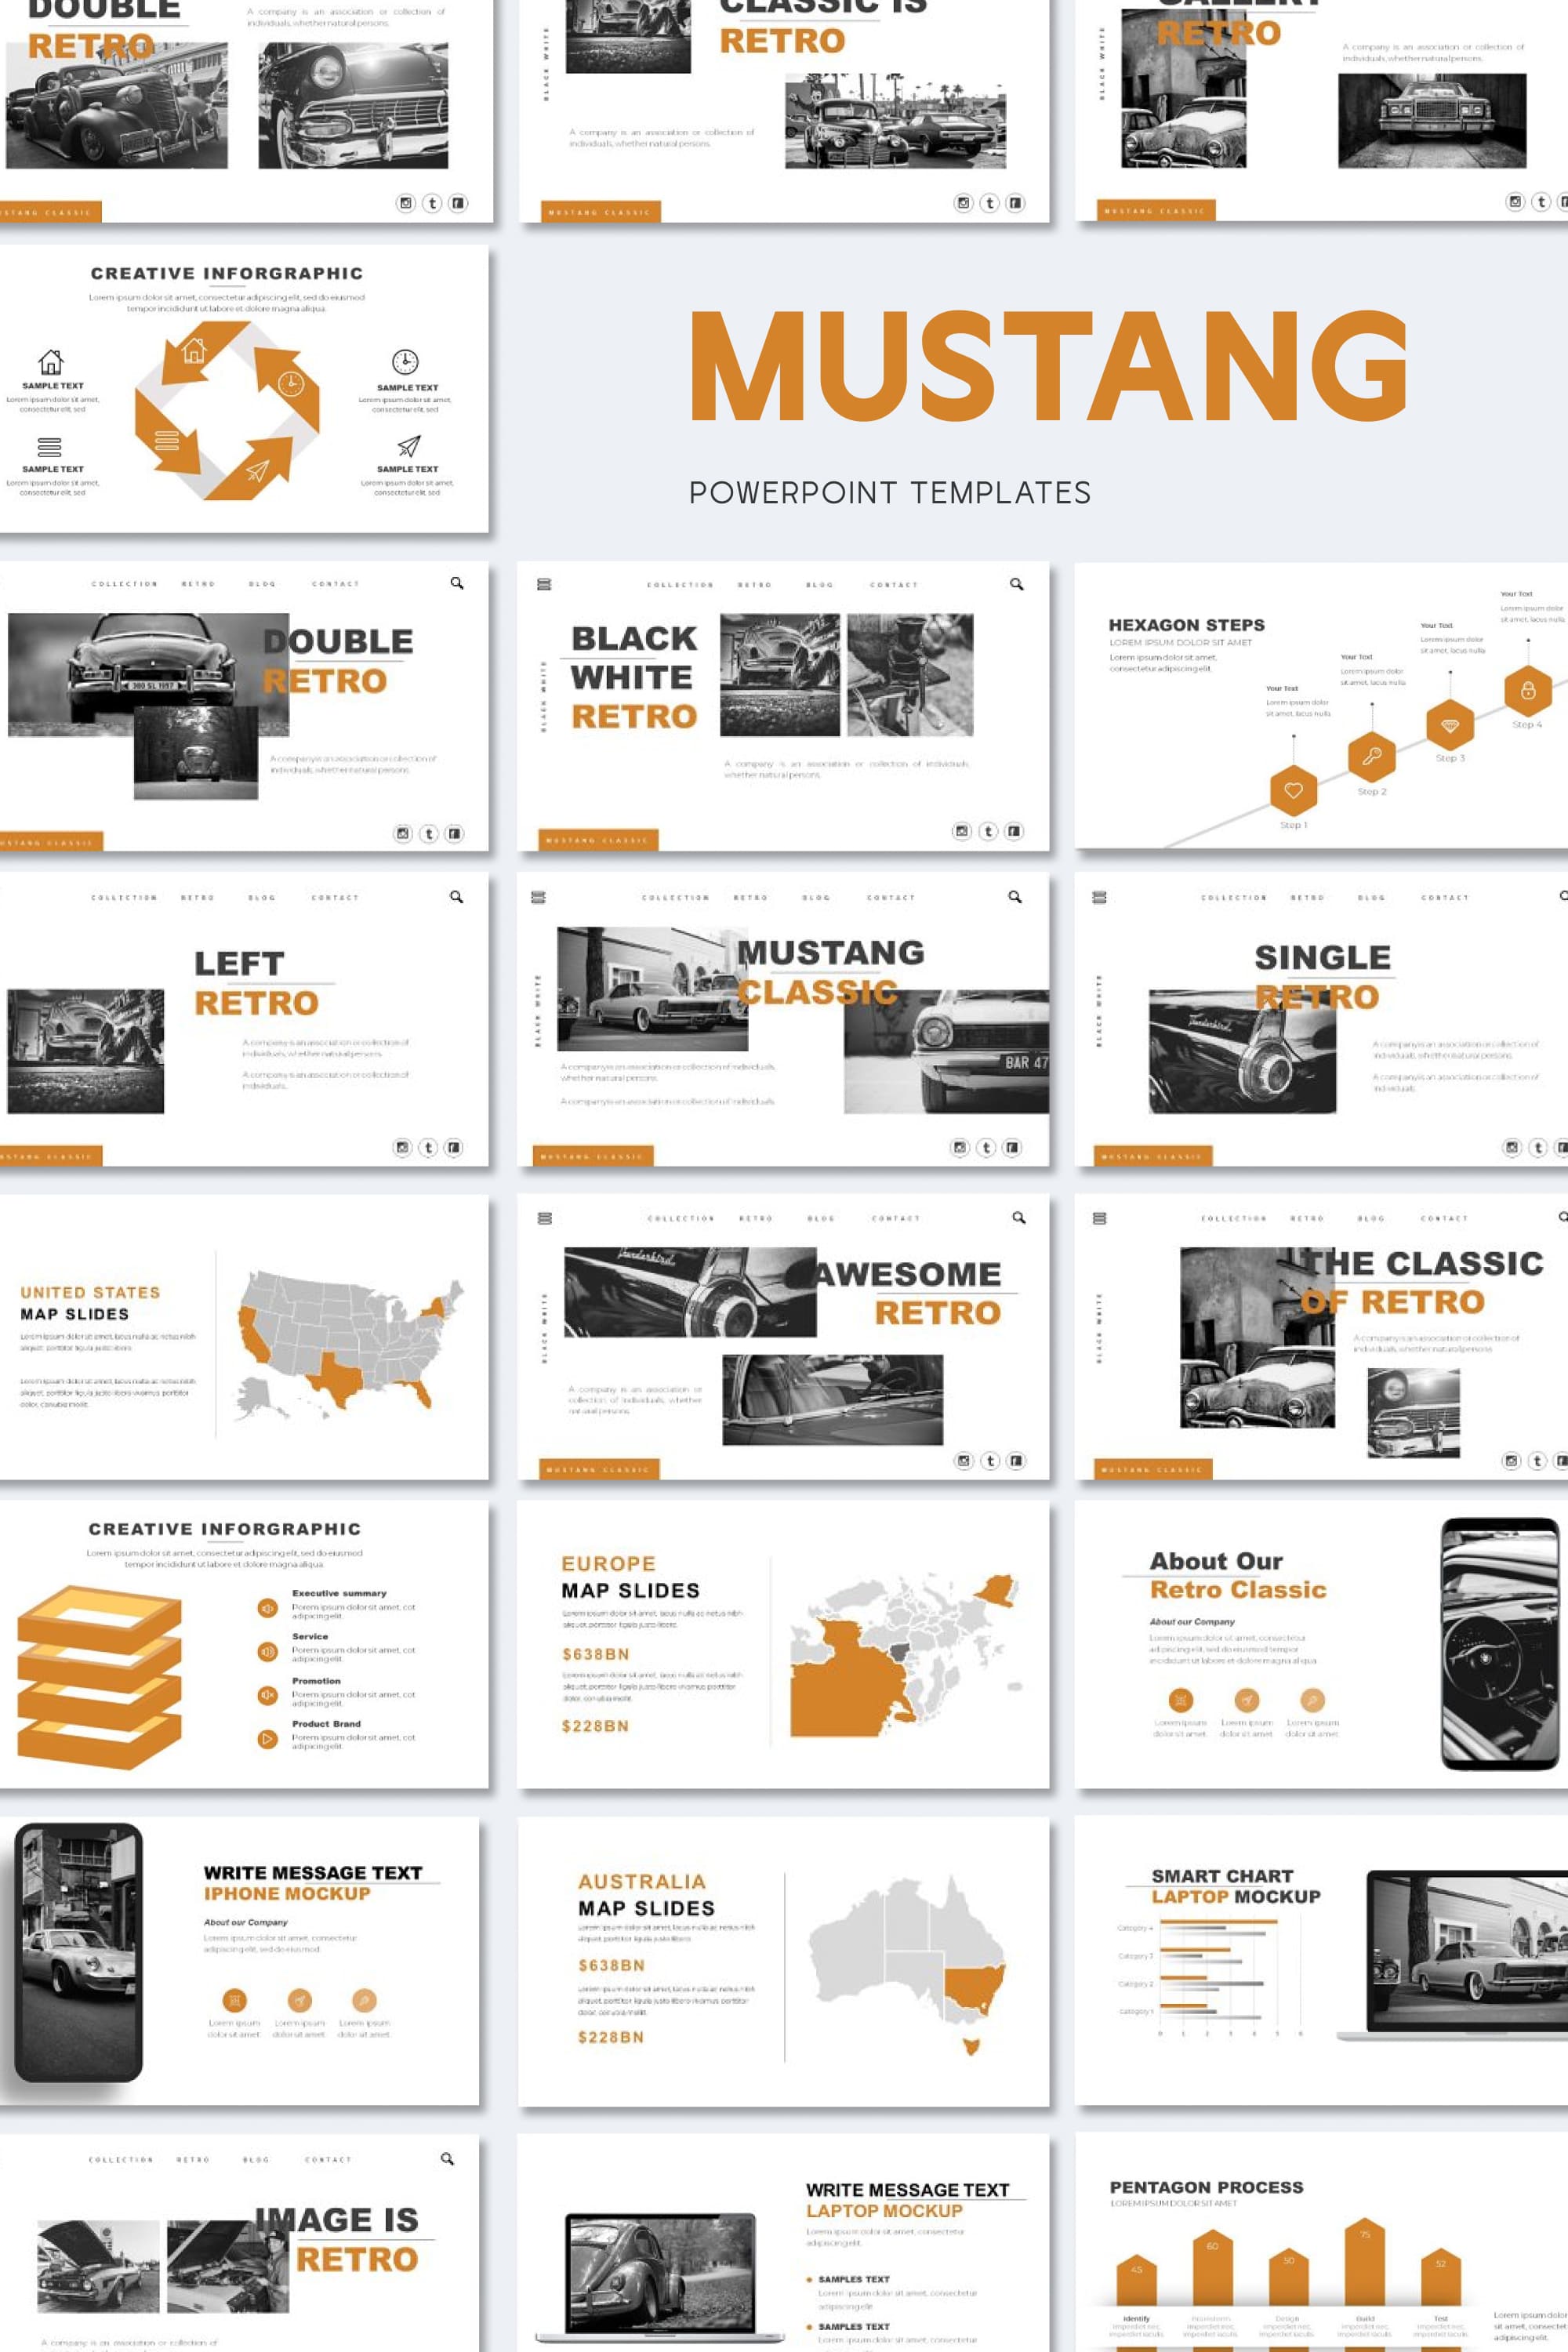 Mustang powerpoint template - pinterest image preview.